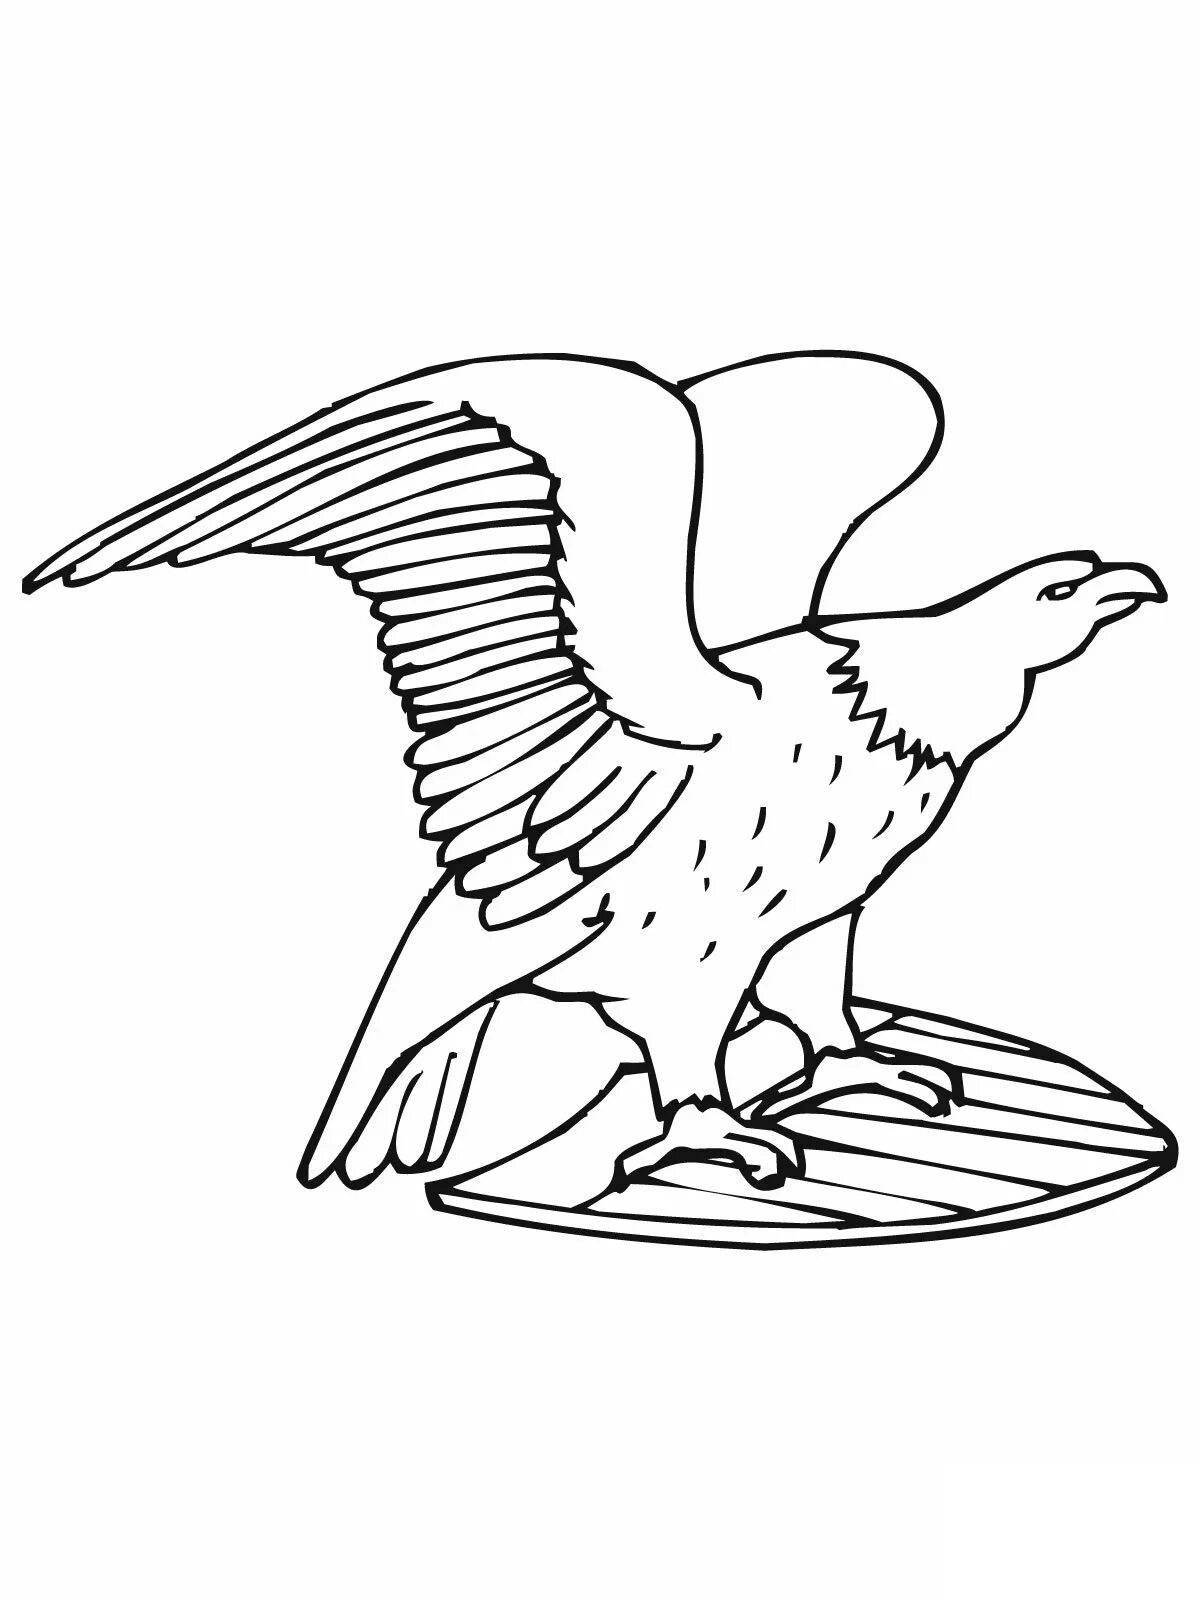 Coloring book cheerful eaglet